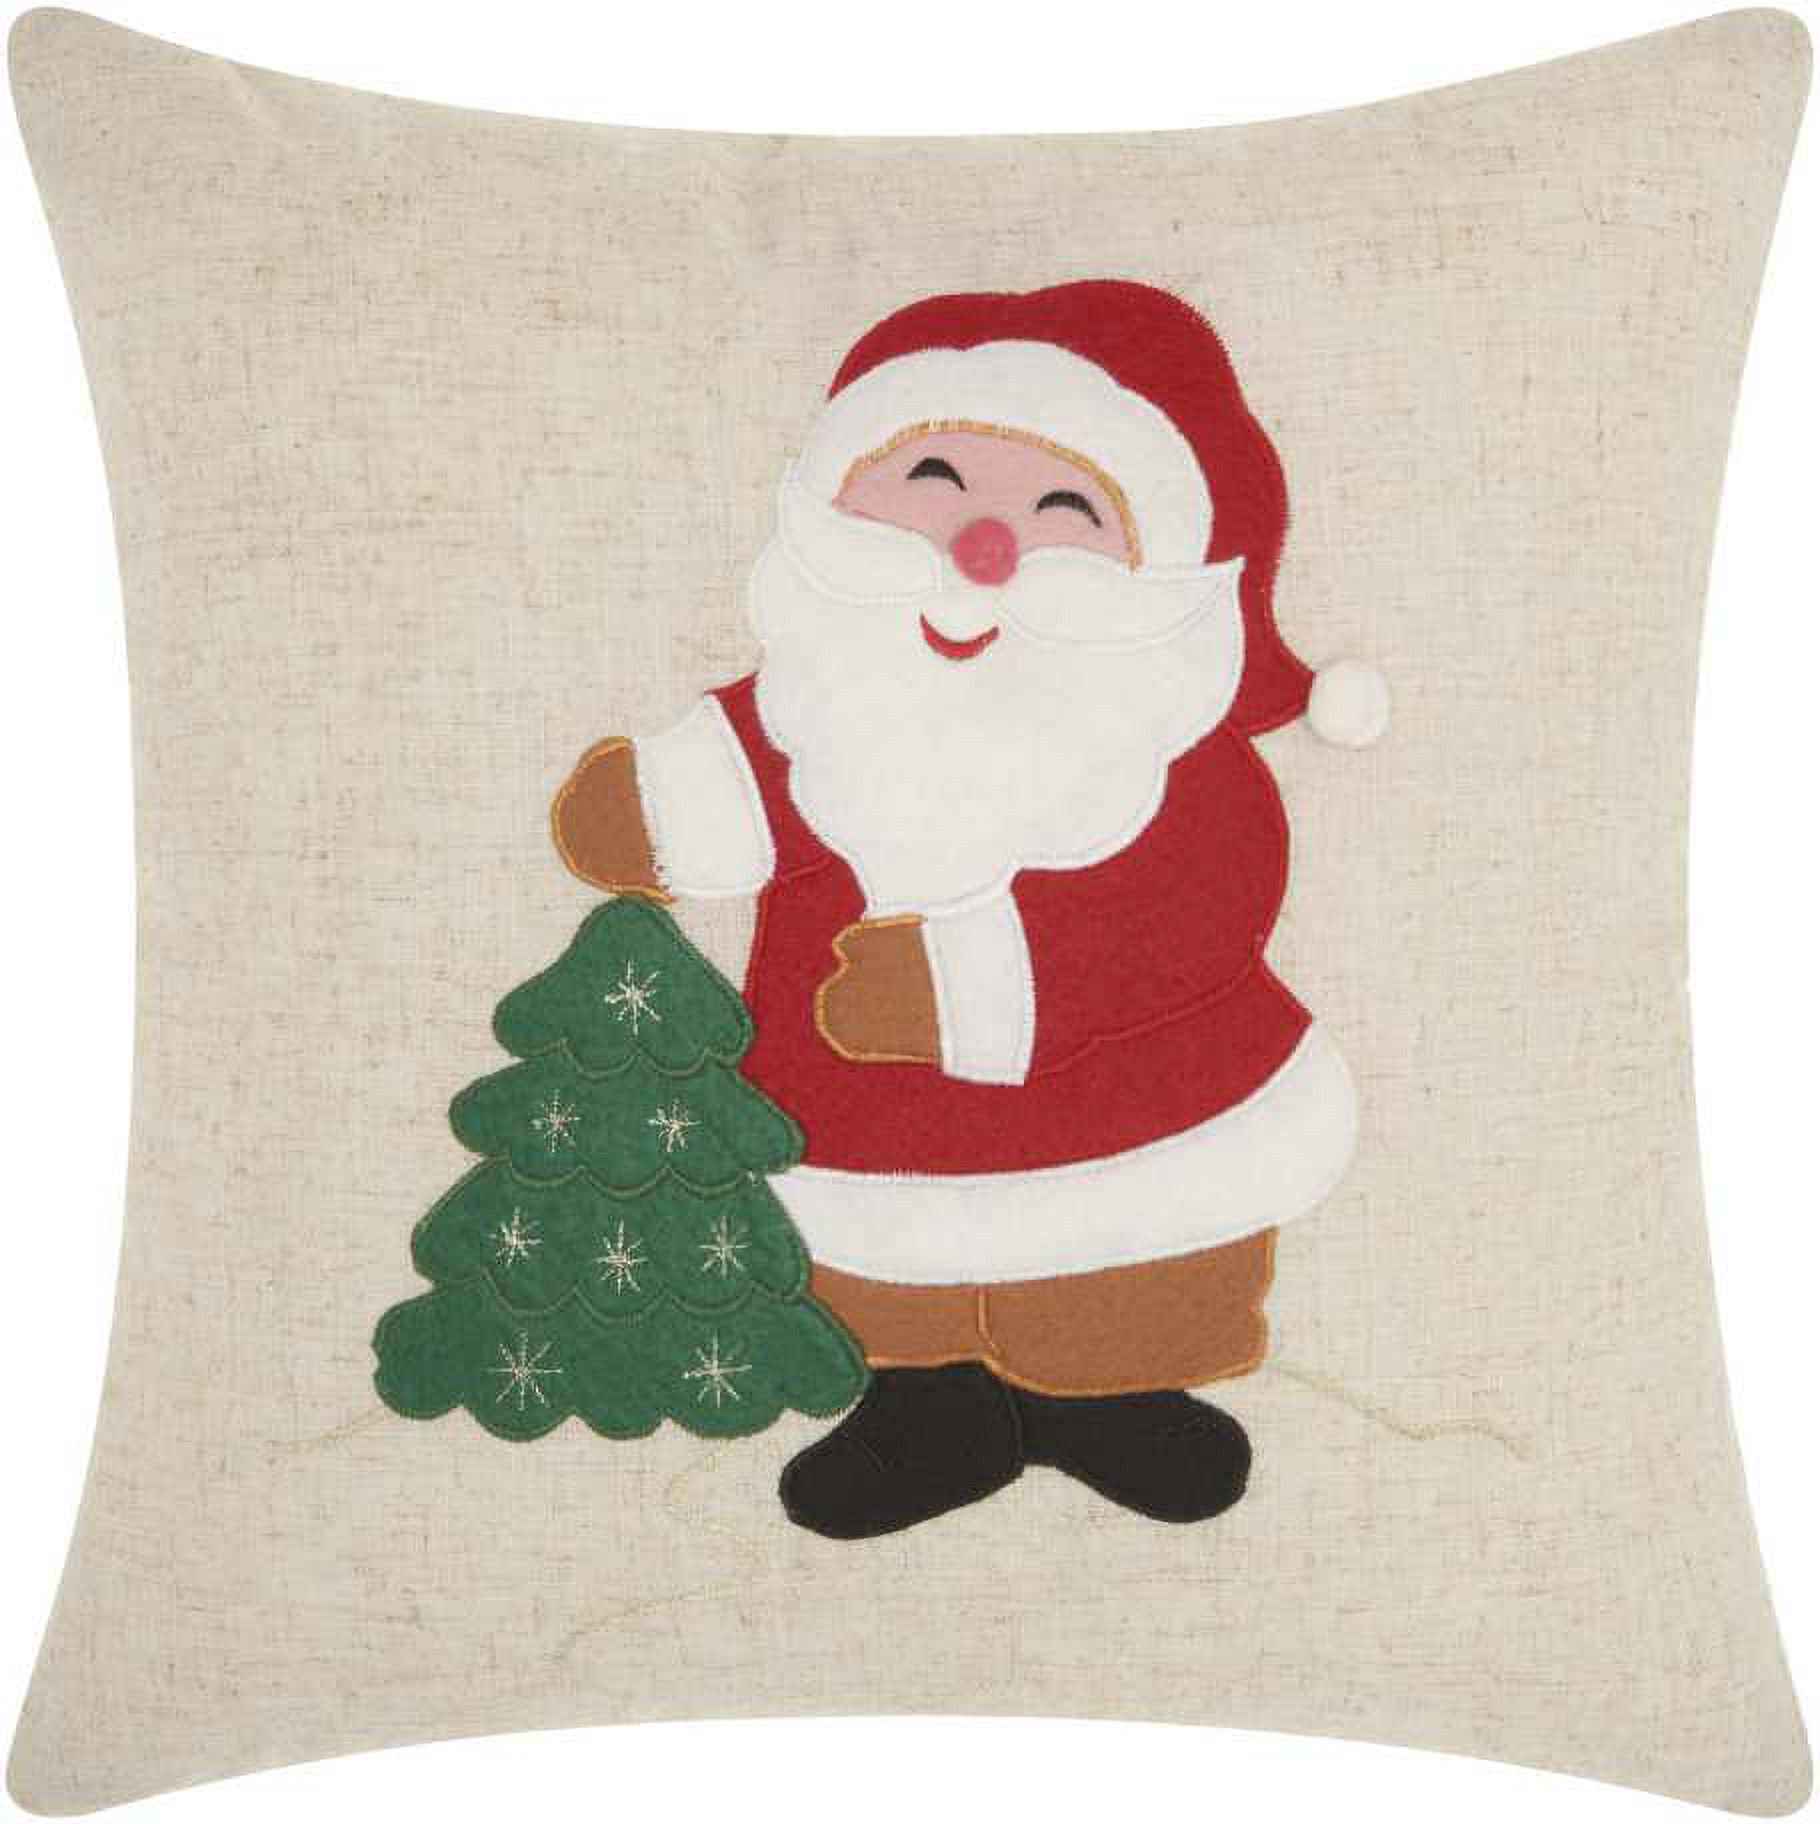 Nourison Home For The Holiday Felt Santa Decorative Throw Pillow, 16" x 16", Natural - image 1 of 2